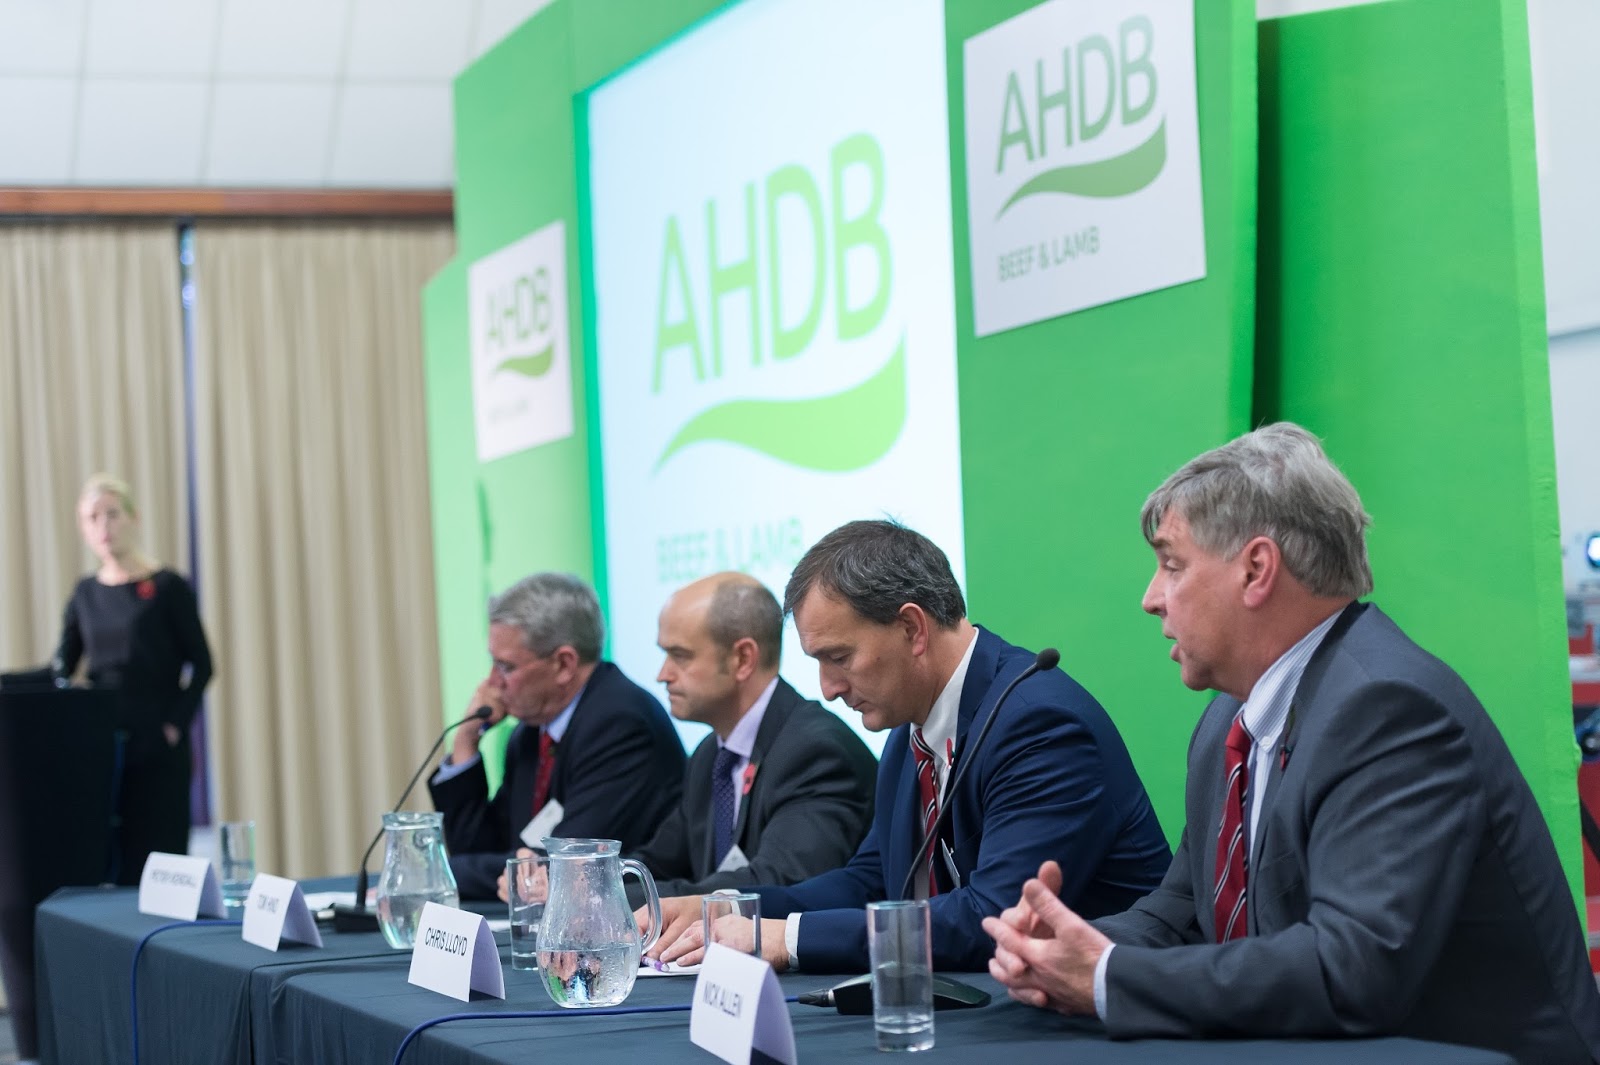 AHDB is a statutory levy board, funded by farmers, growers and others in the supply chain